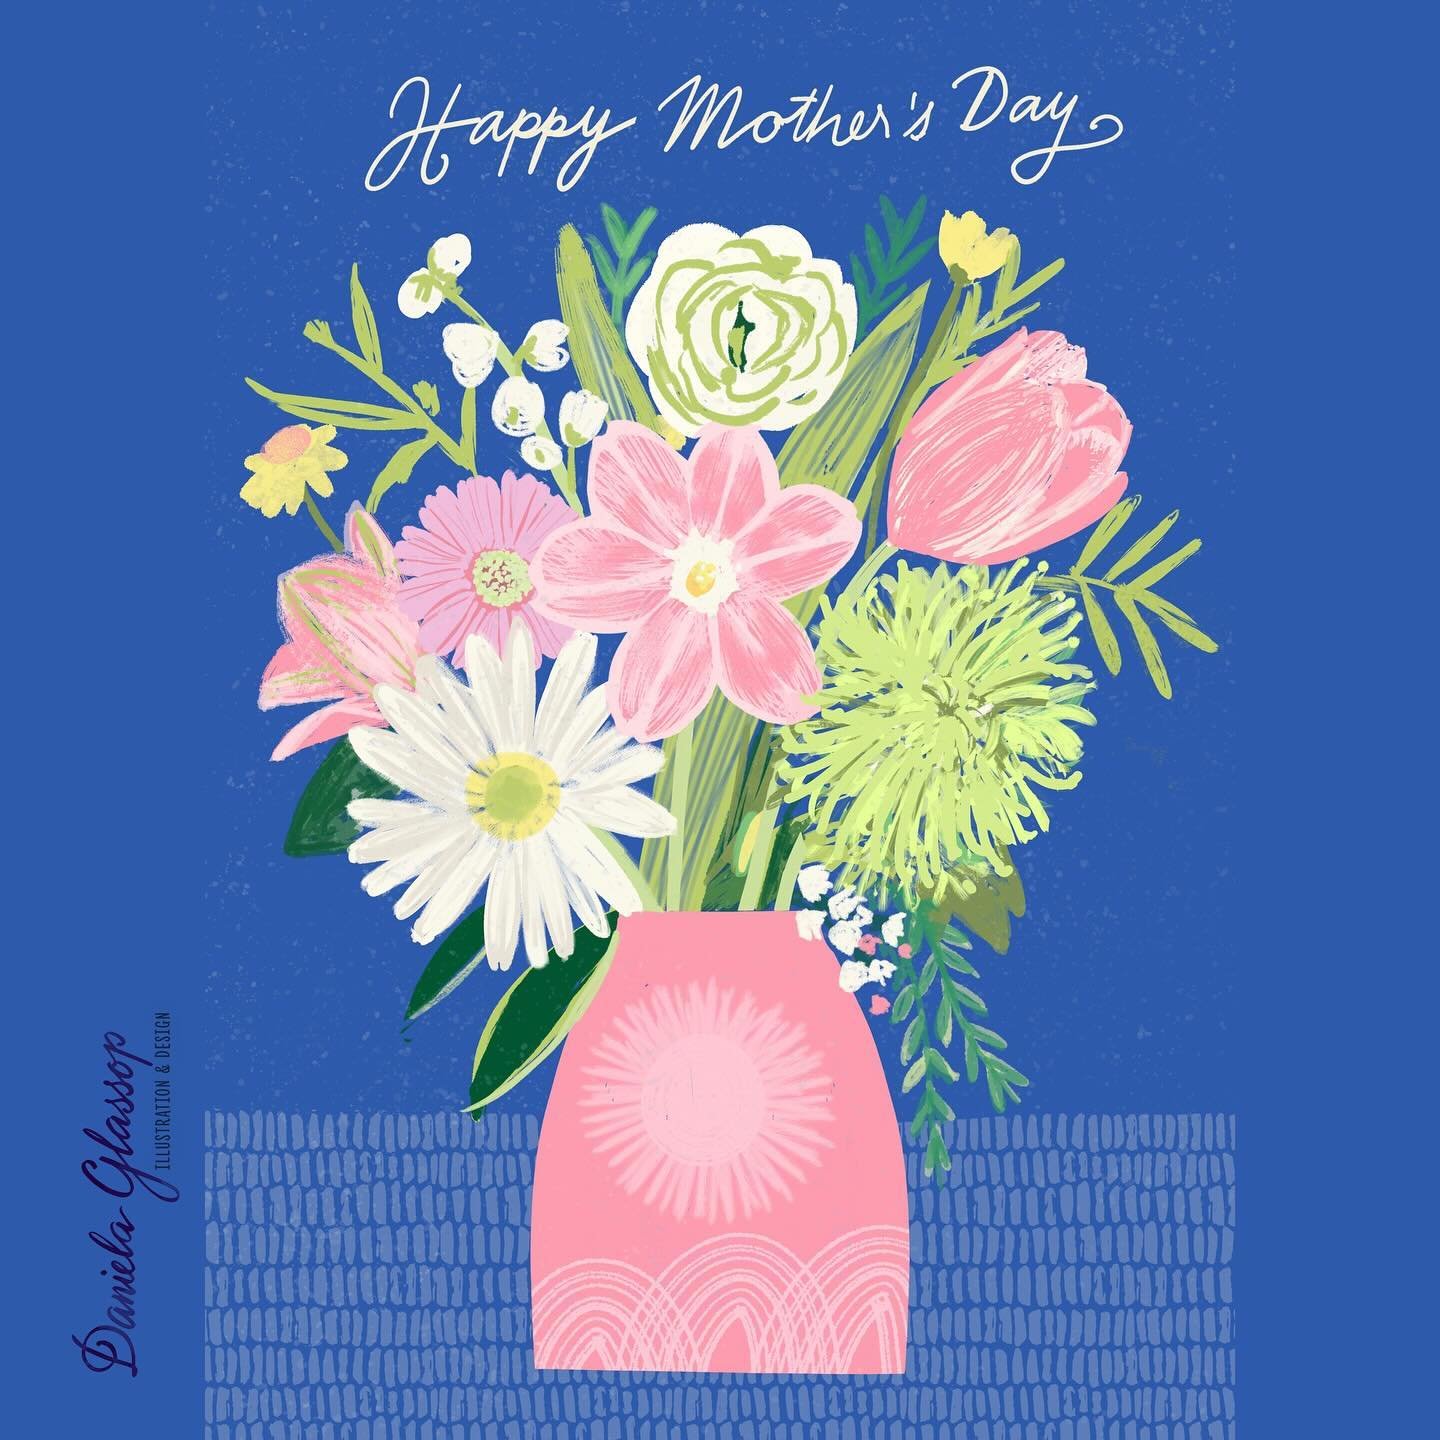 Happy Mother&rsquo;s day to all the Mums and those that take on a Mothering role, hope you have had or get to have special day and all the other days too. Also thinking of those of you who have lost your Mums; I lost mine when she was too young.

Cel